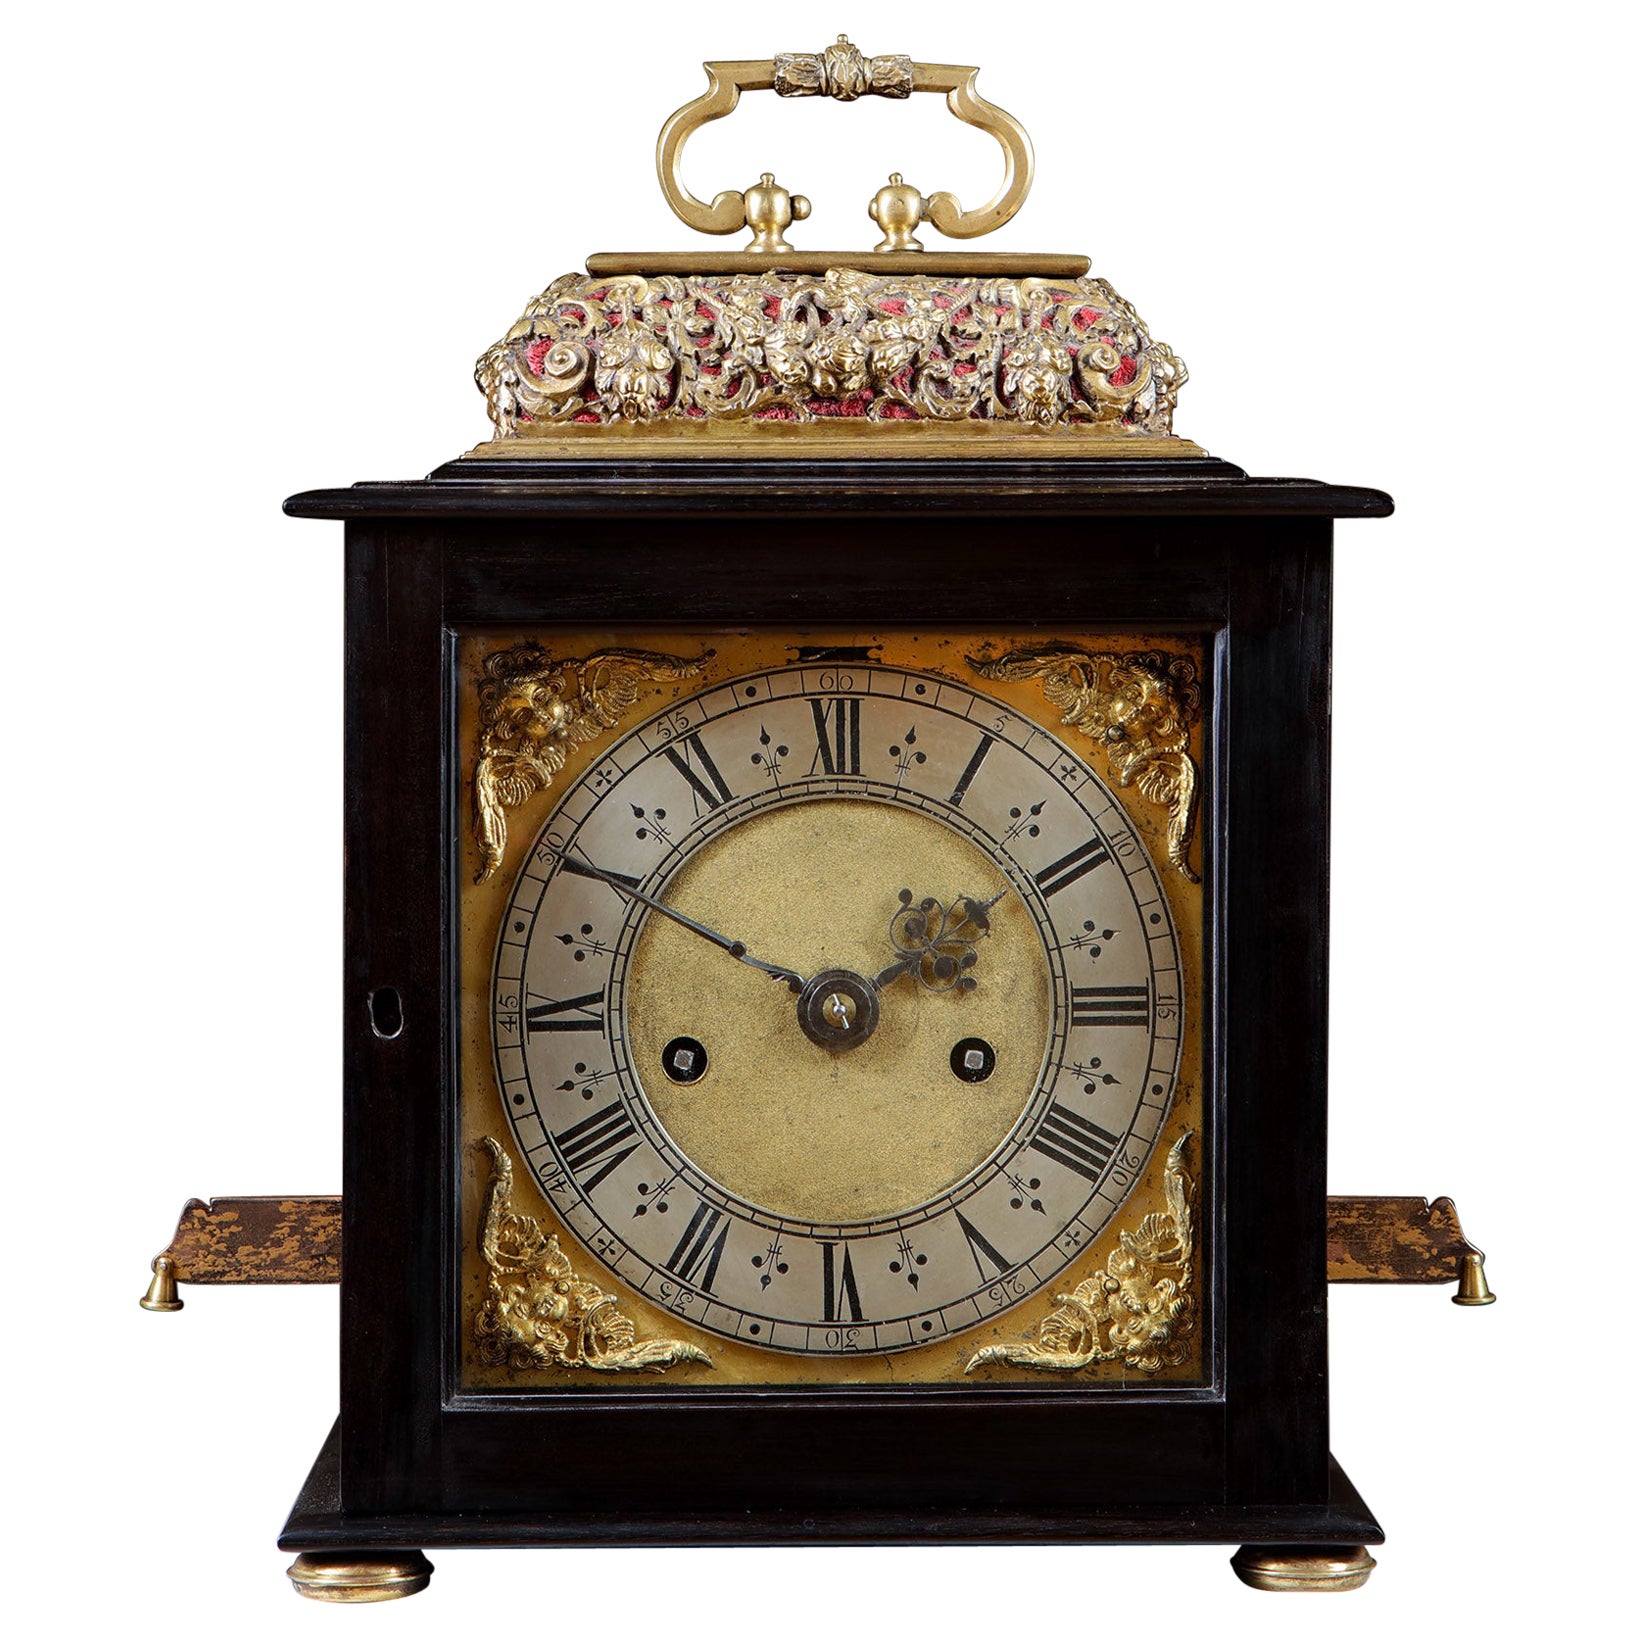 A Rare and Important Charles II 17th Century Table Clock by Henry Jones For Sale